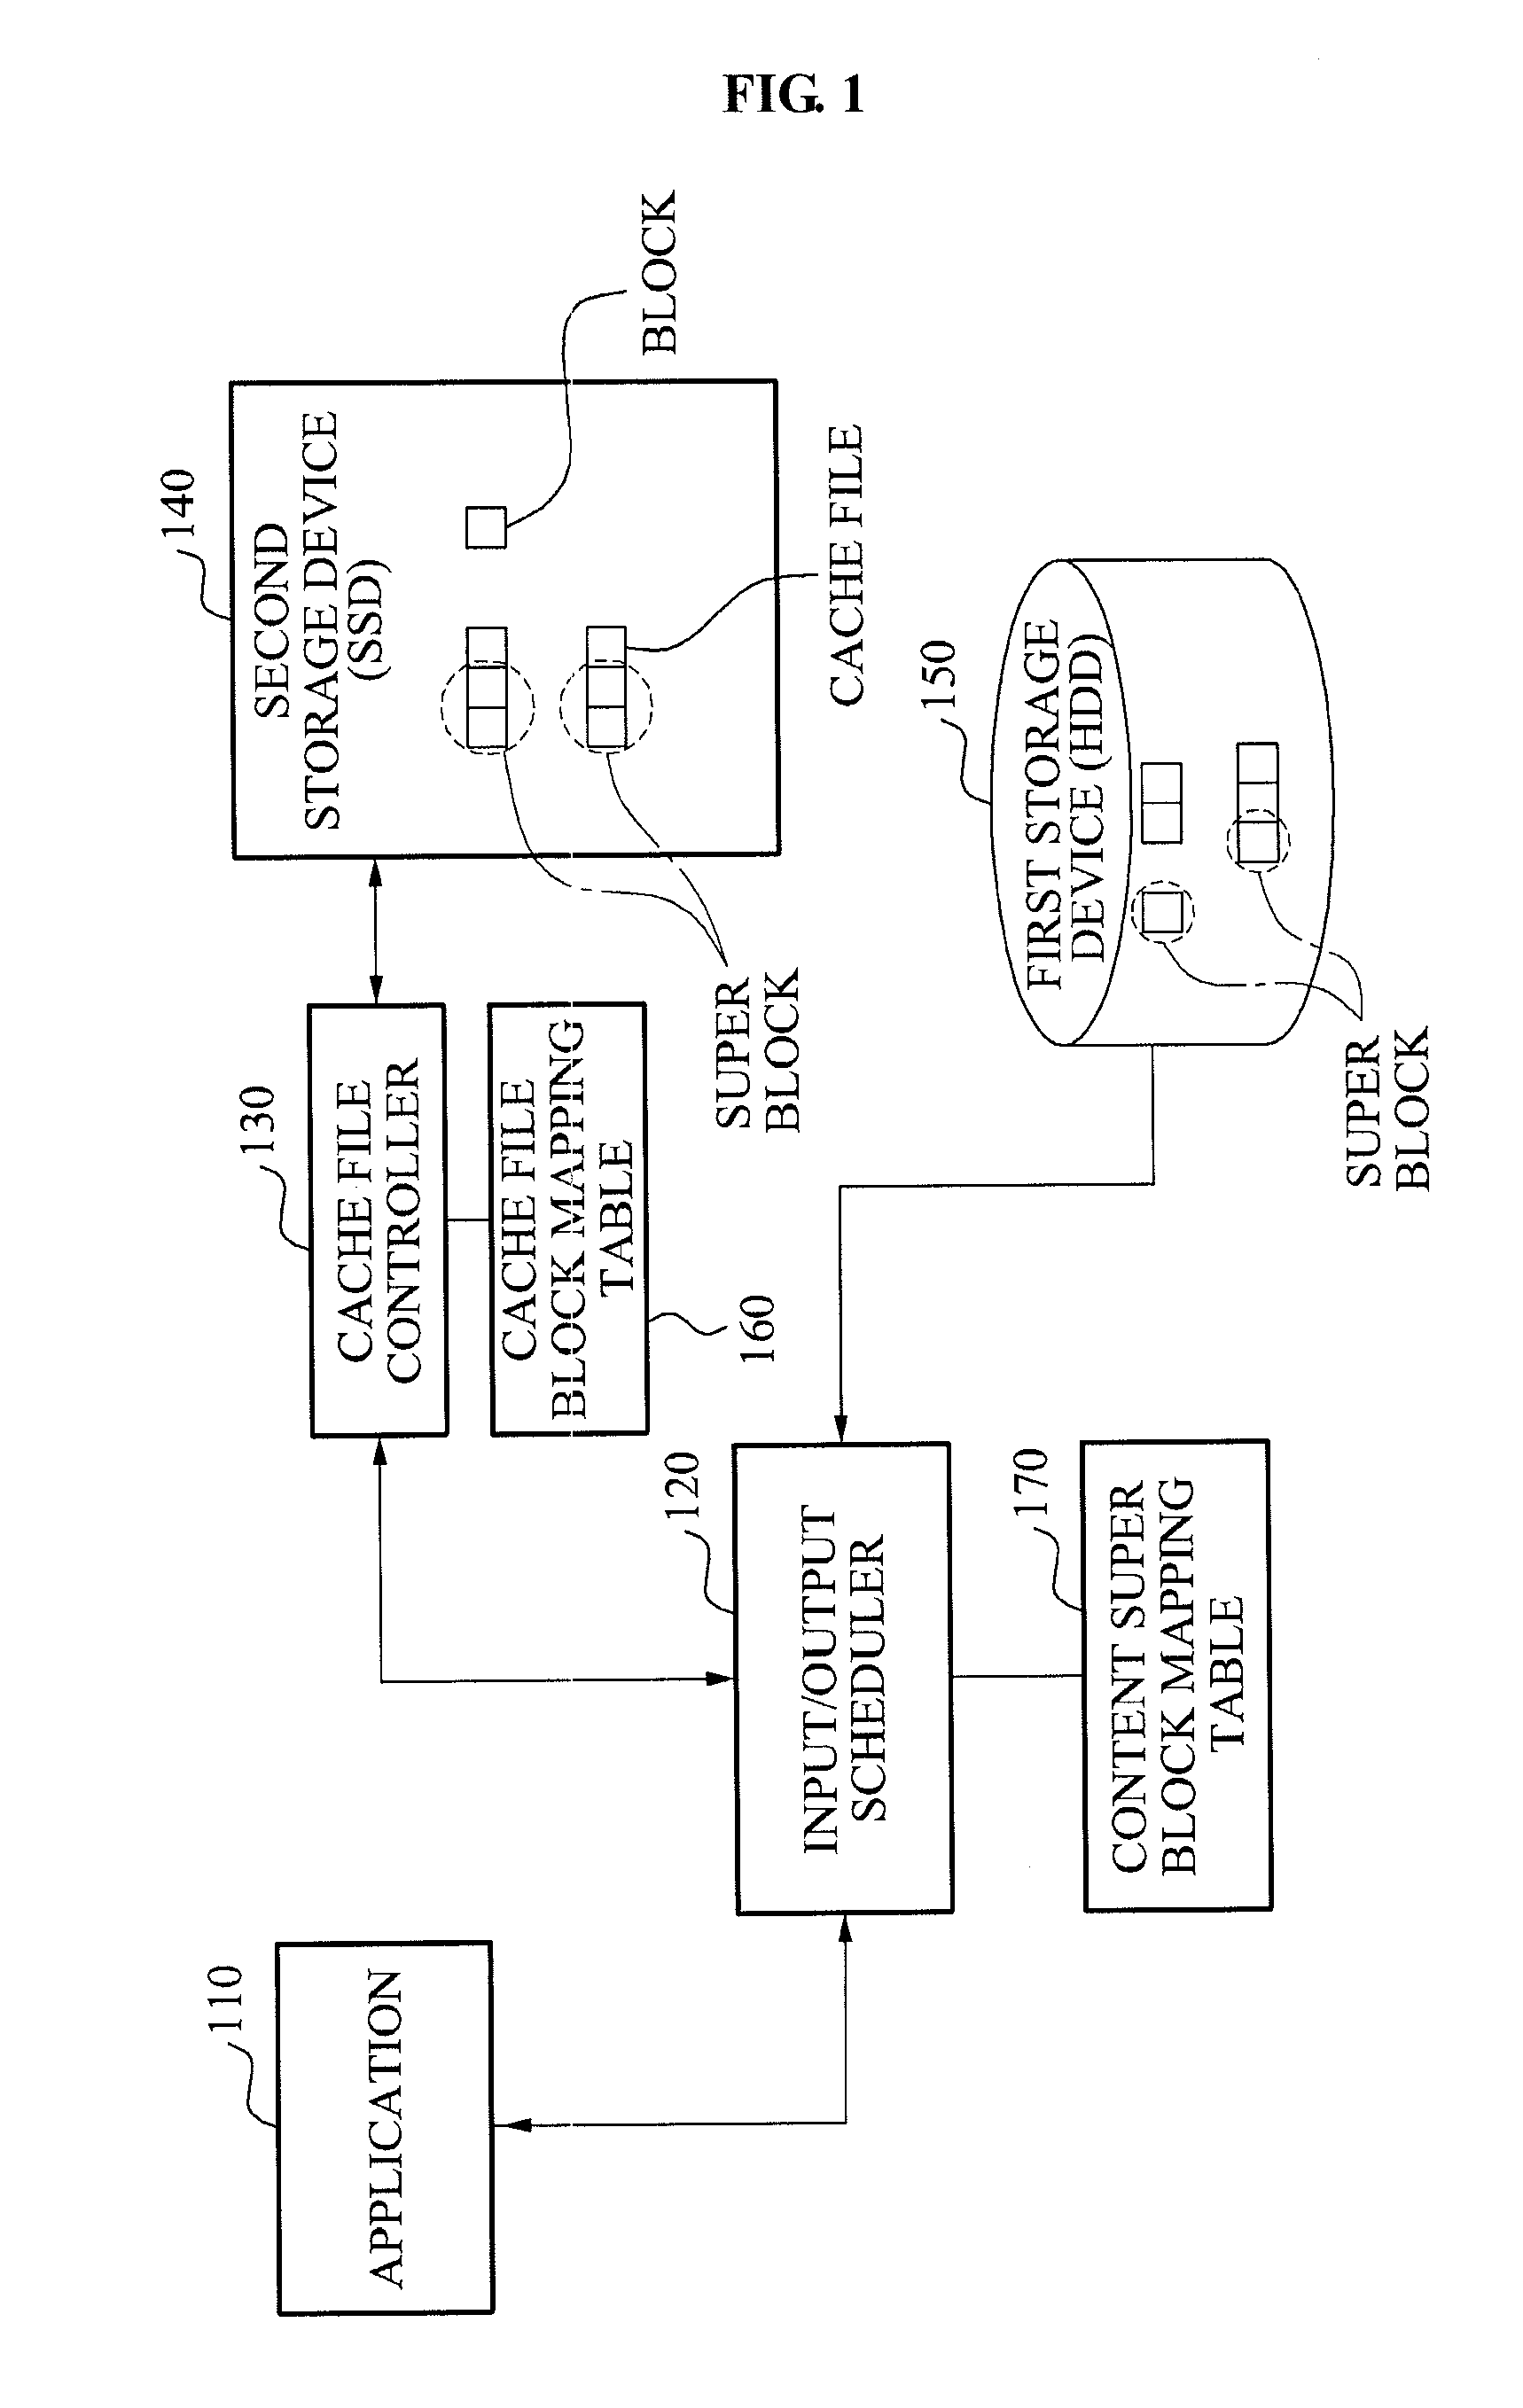 Storage system using a rapid storage device as a cache